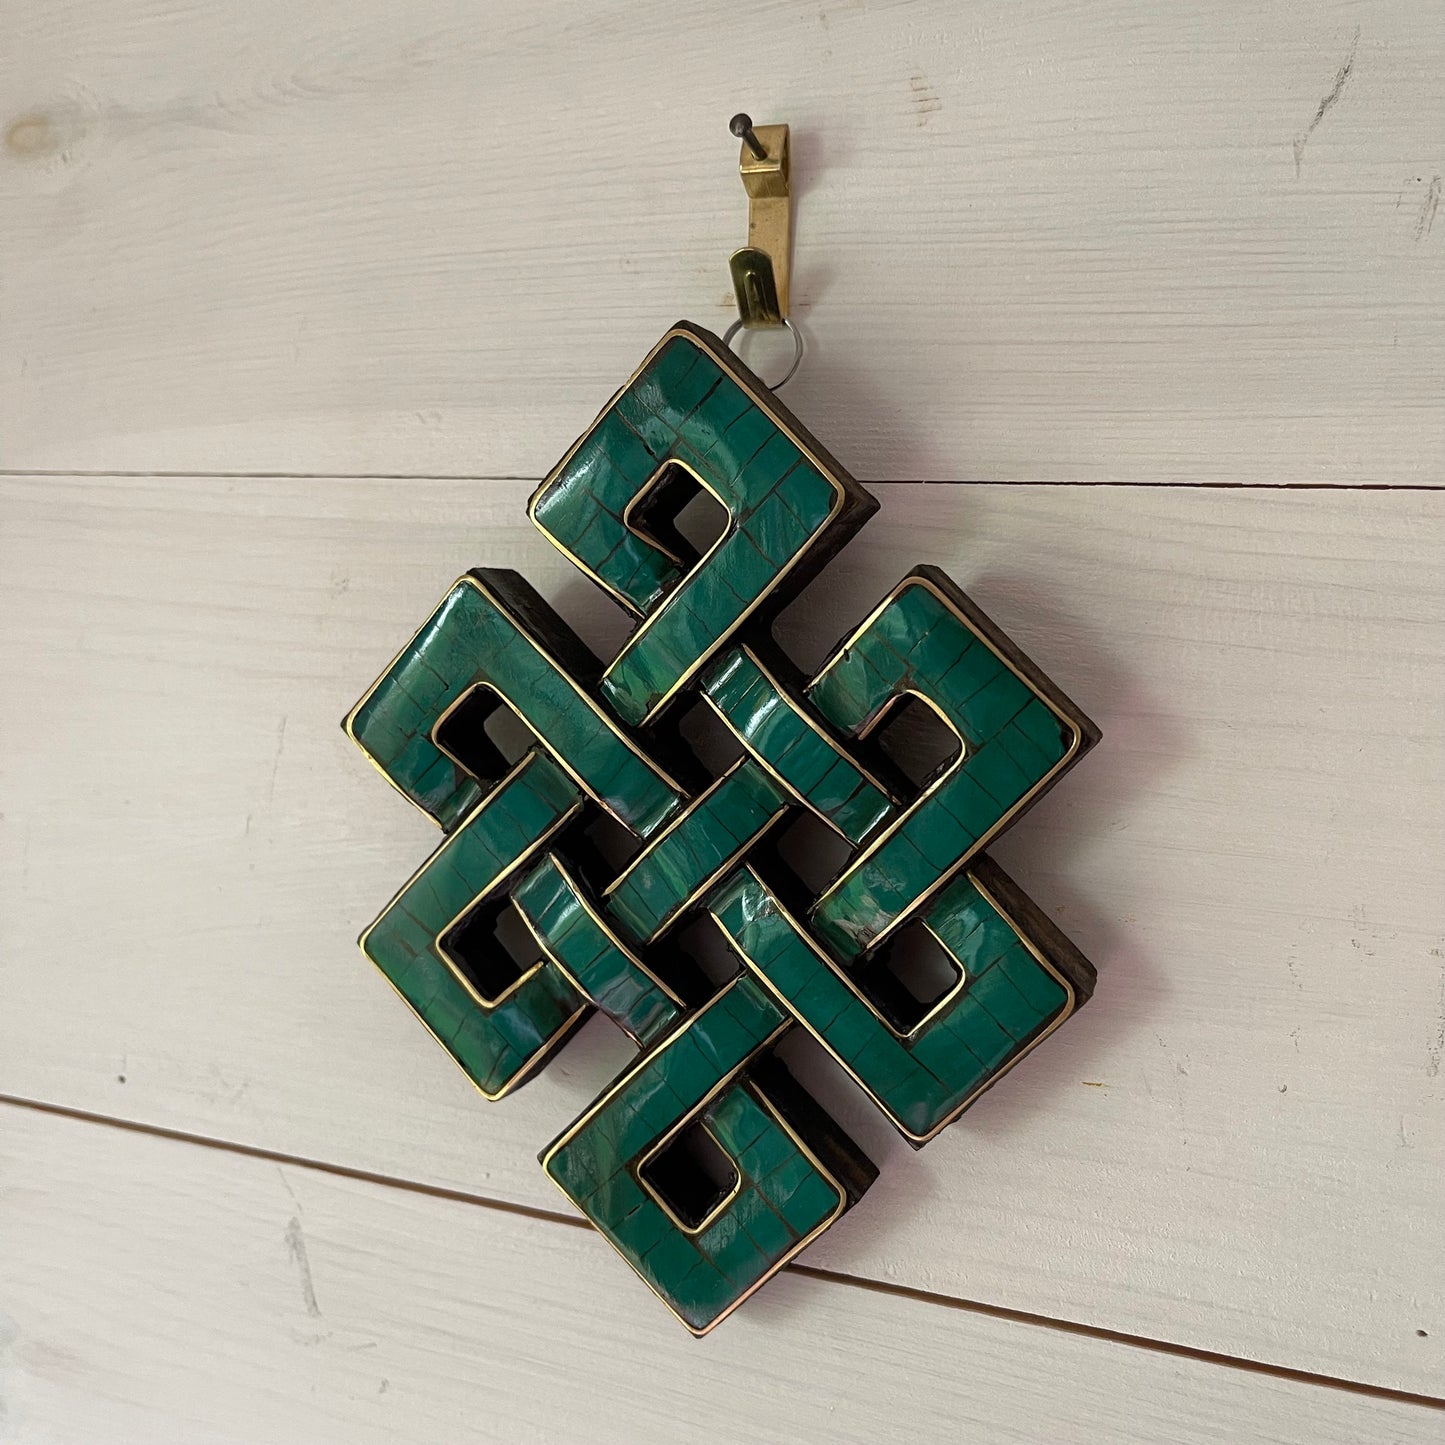 Tibetan Turquoise decorated Endless Knot Sml  13 X 10cm